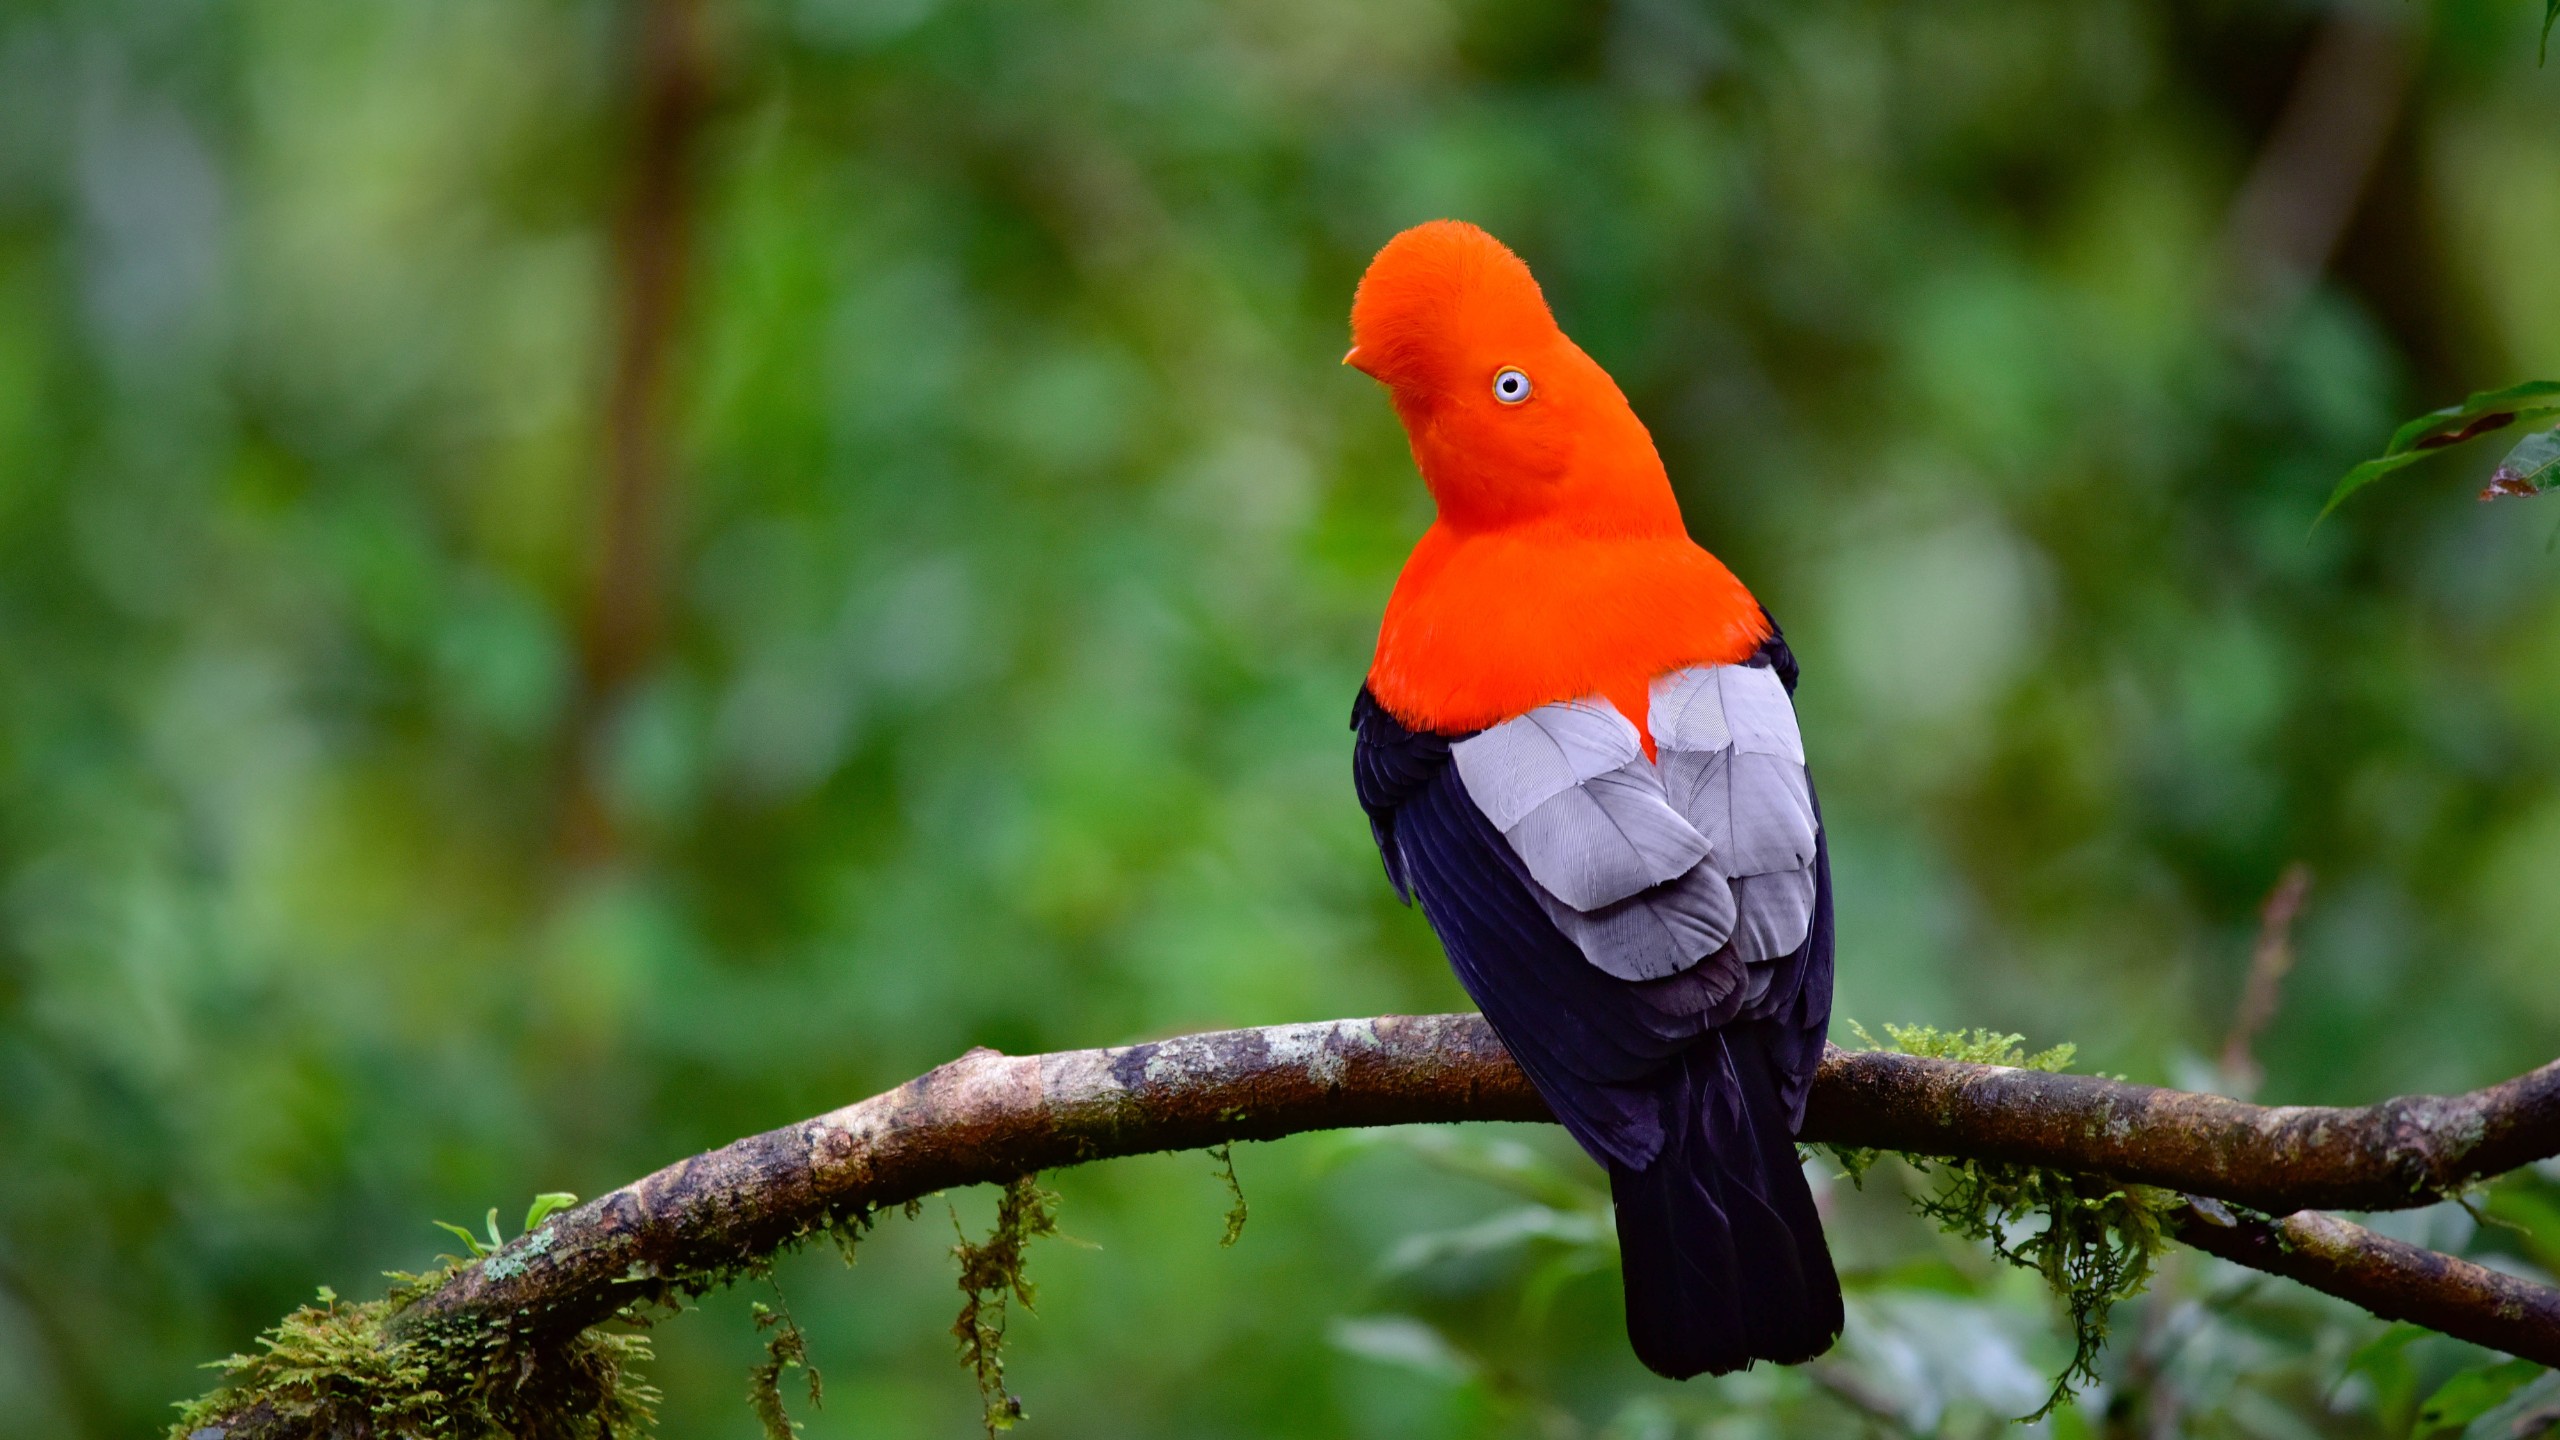 Flamboyant king, a portrait of the Andean cock of the rock